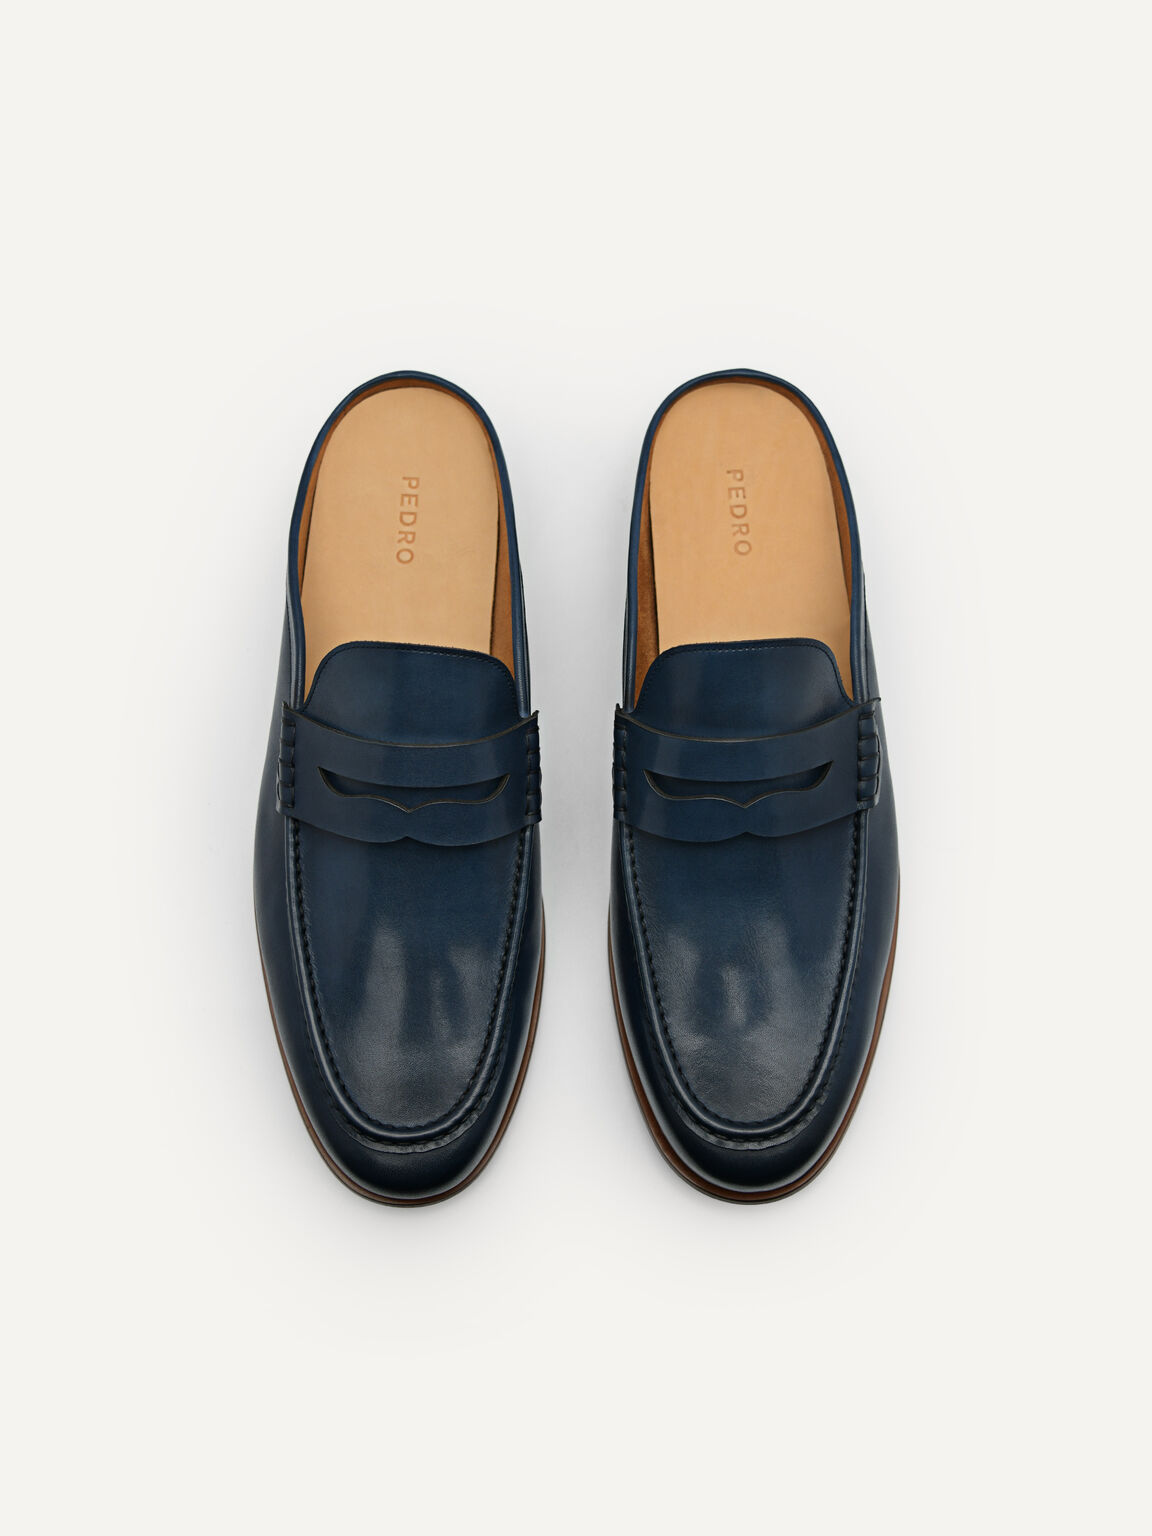 Blake Leather Slip-On Loafers, Navy